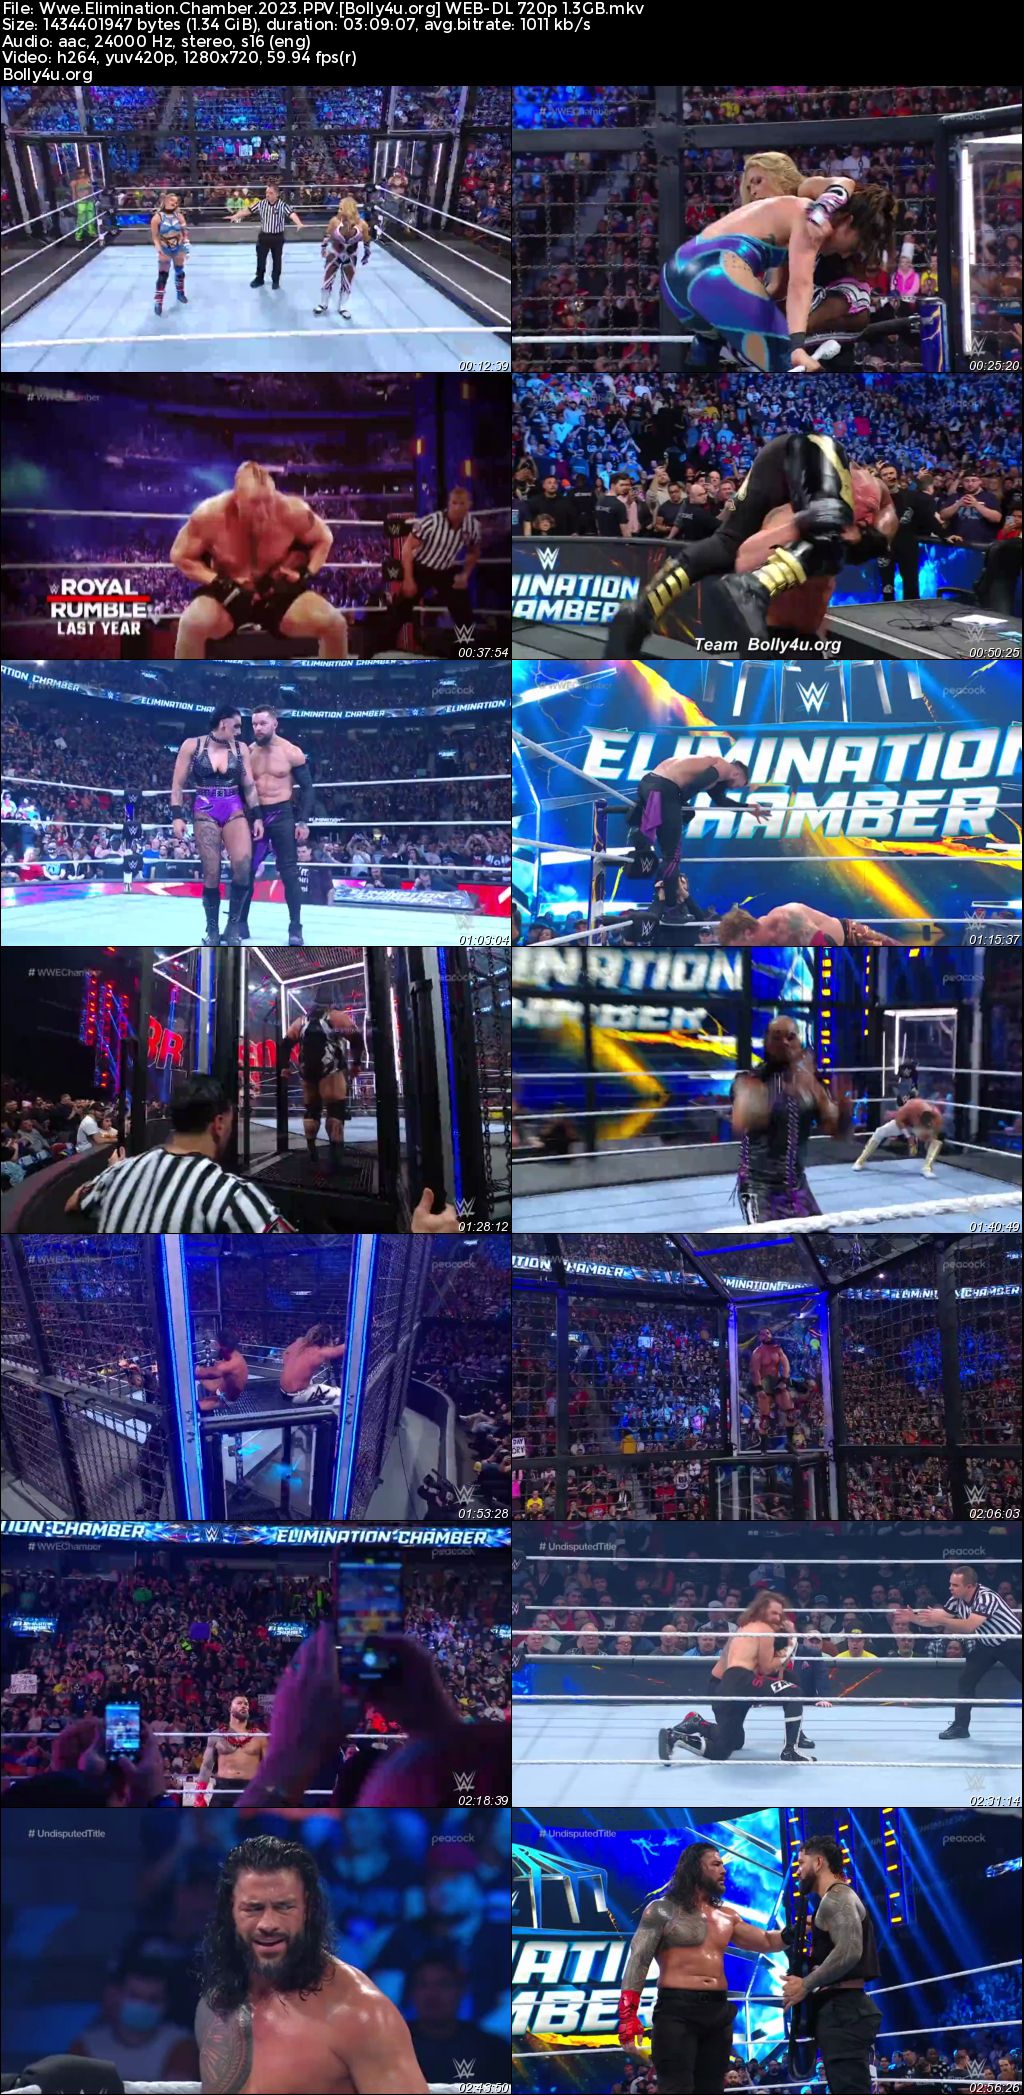 WWE Elimination Chamber 2023 WEB-DL PPV 1080p 720p 480p Download